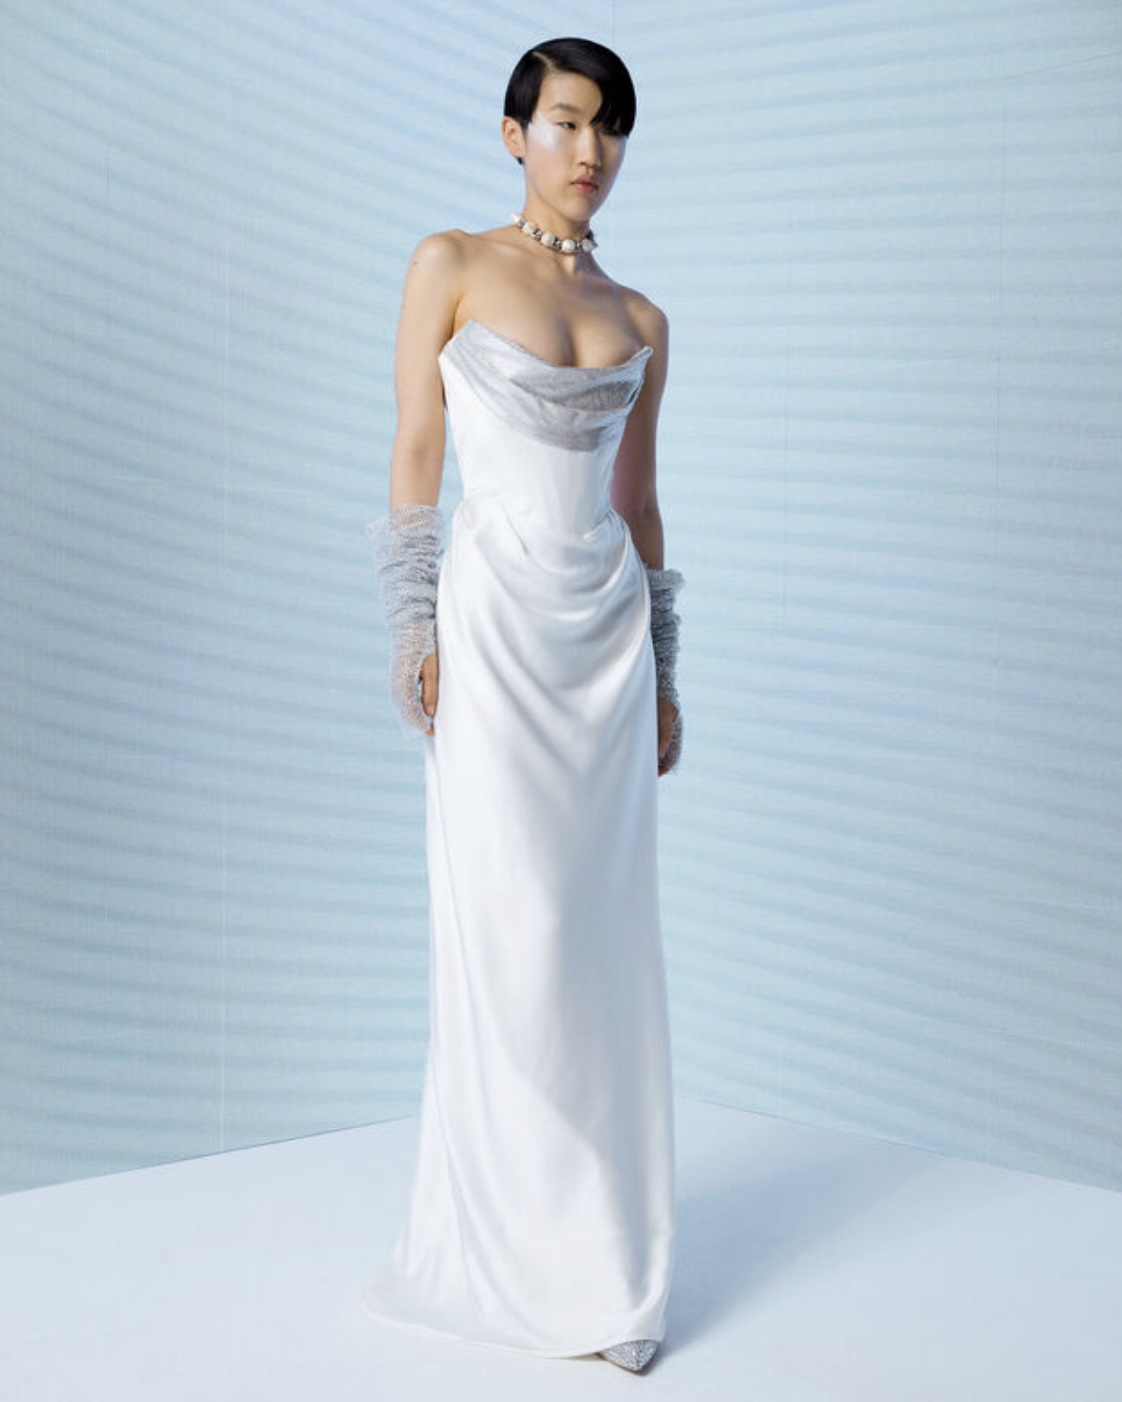 Wedding Dress Styles for Athletic Build